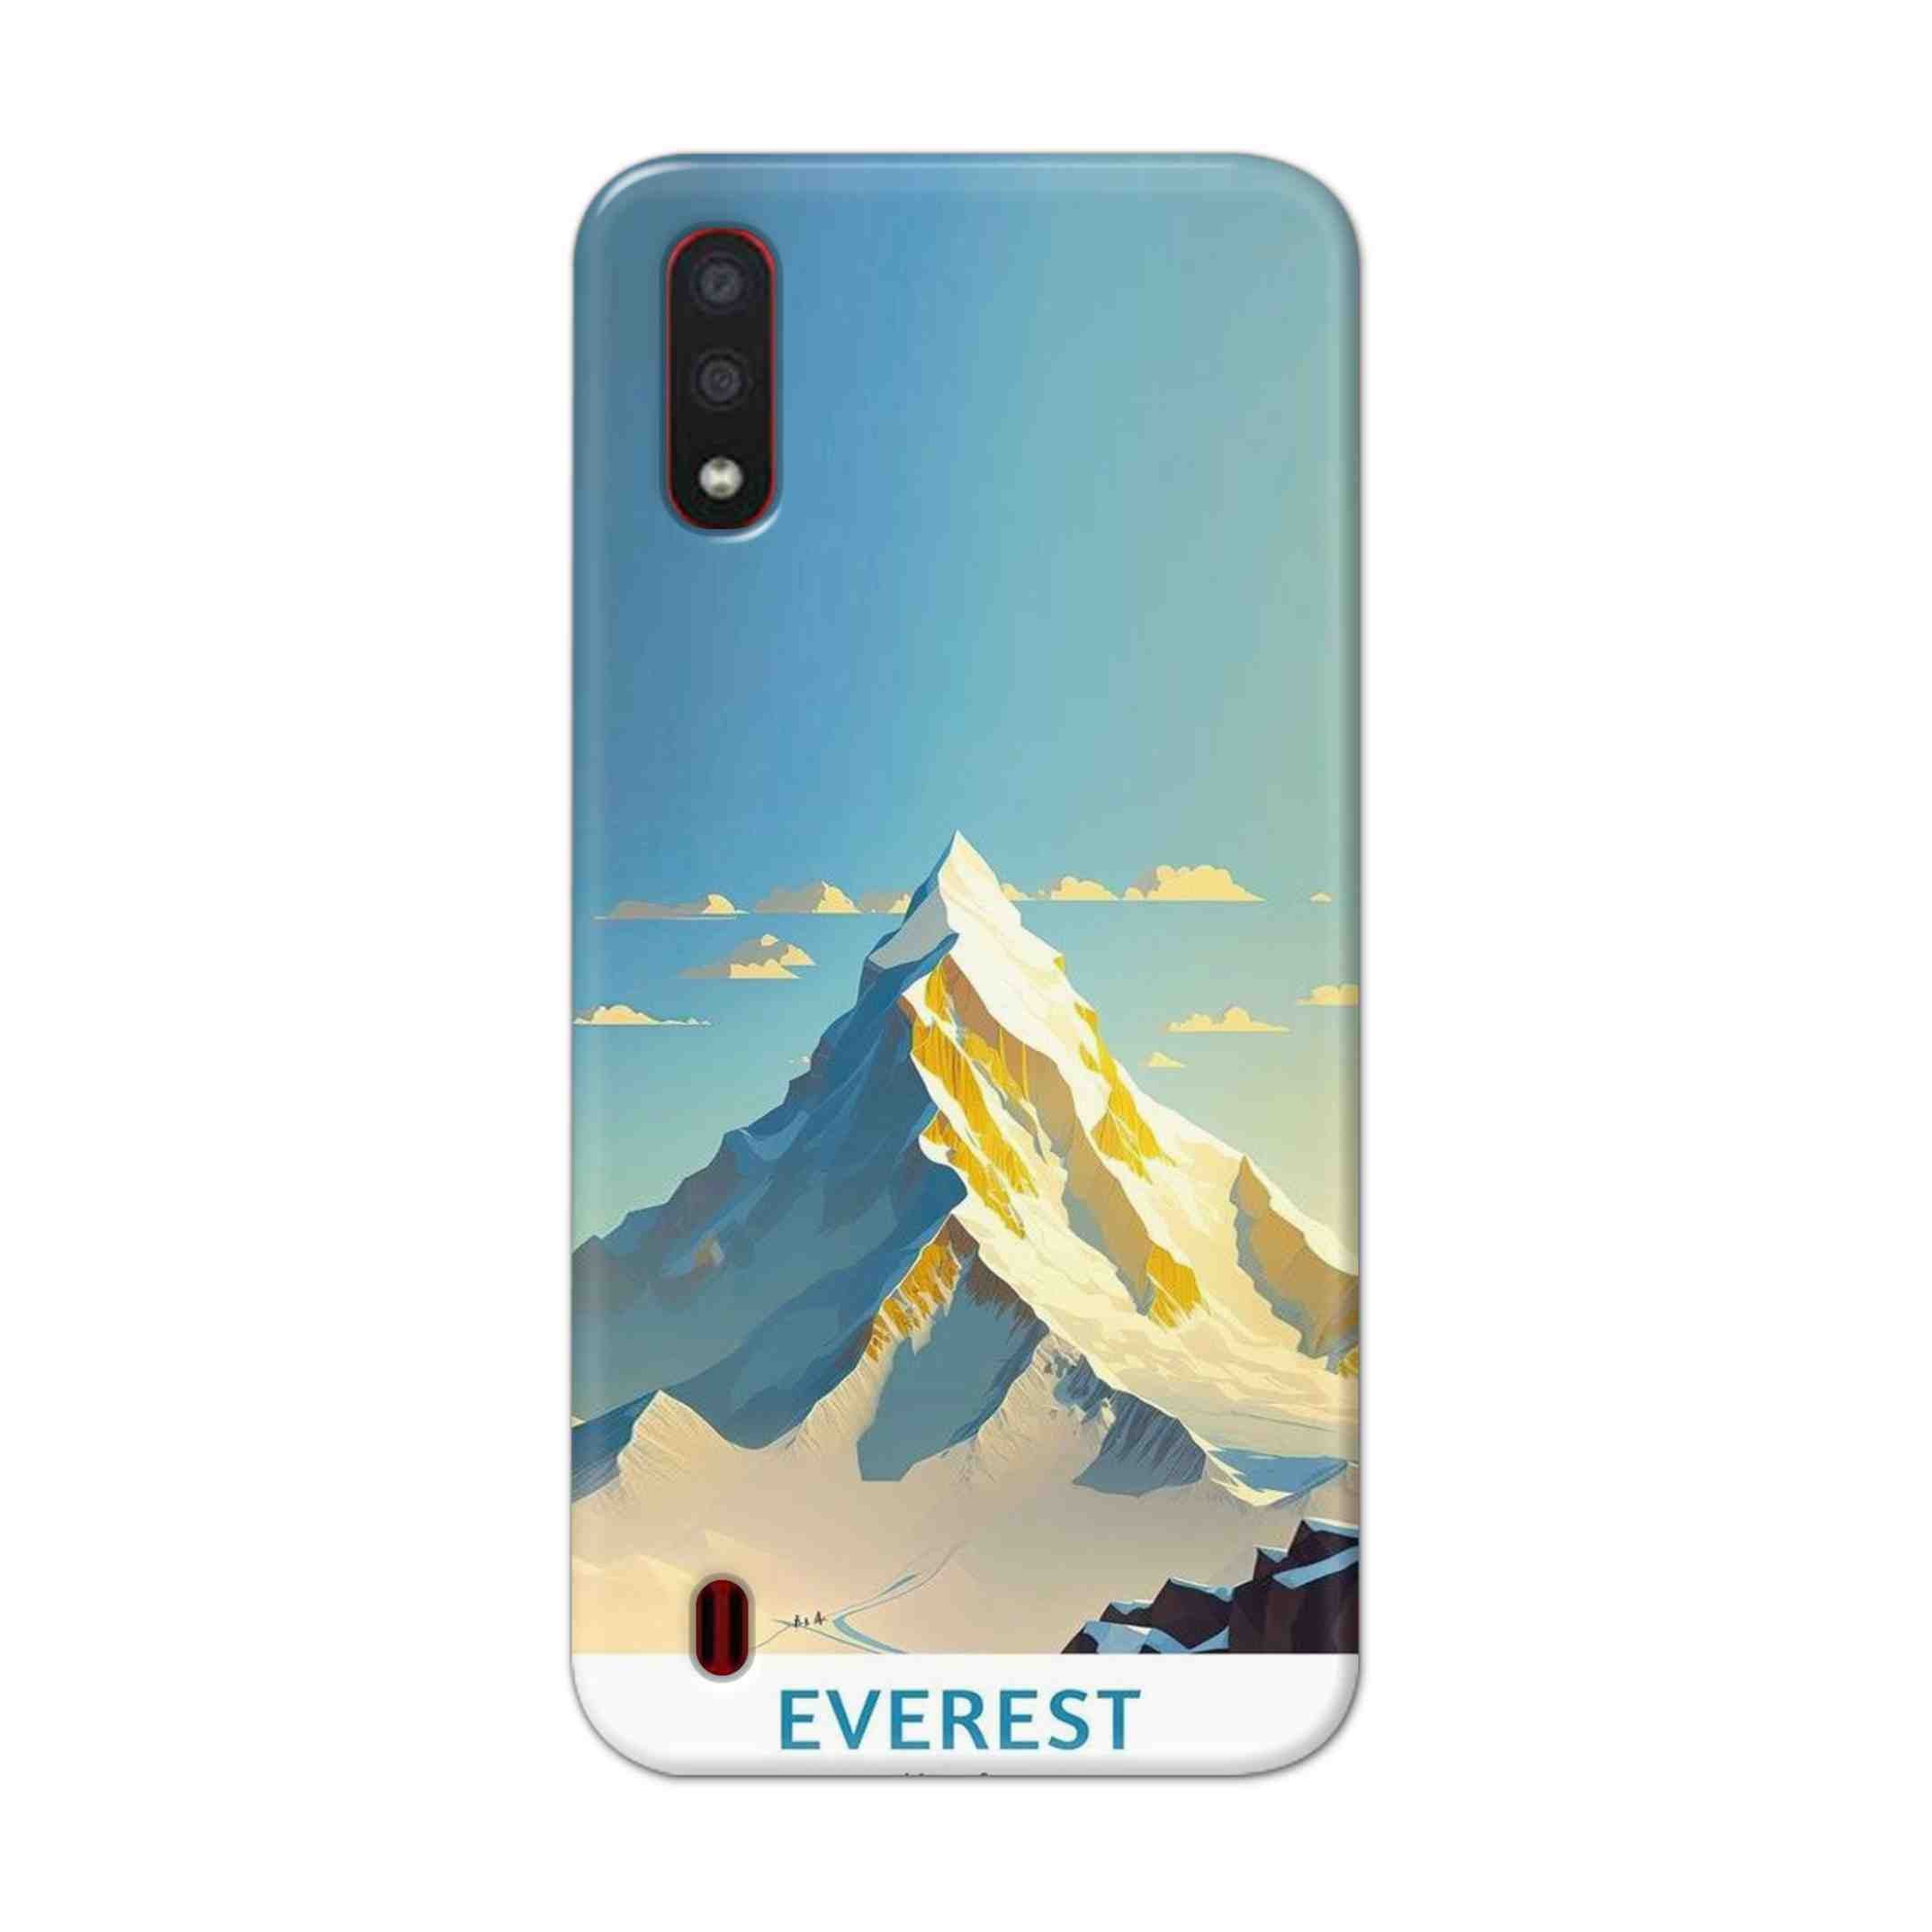 Buy Everest Hard Back Mobile Phone Case/Cover For Samsung Galaxy M01 Online